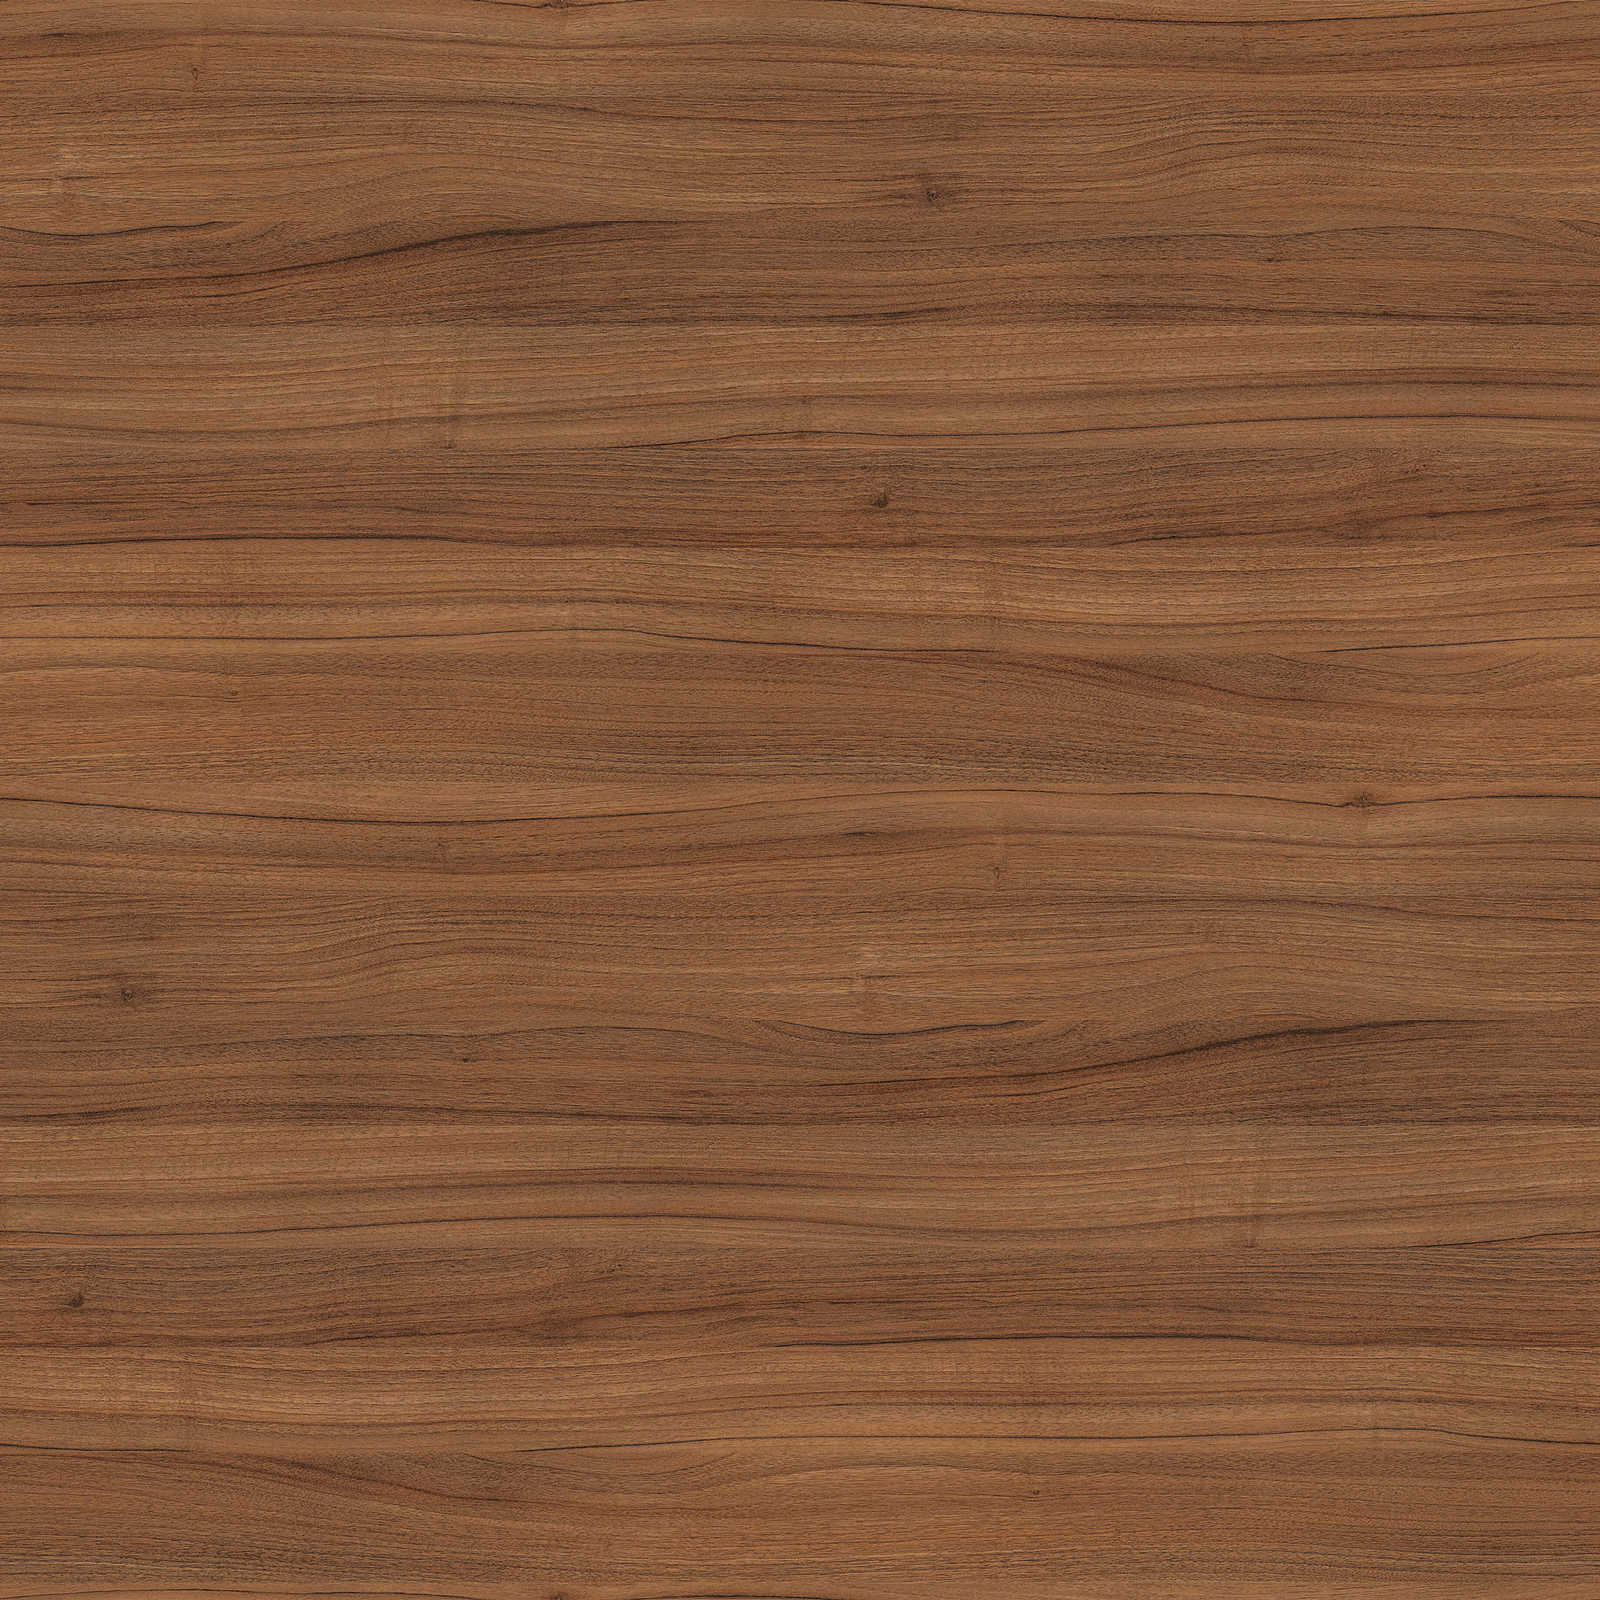             Wood stain »Walnut« silk gloss for interior & exterior - 2,5 litre
        